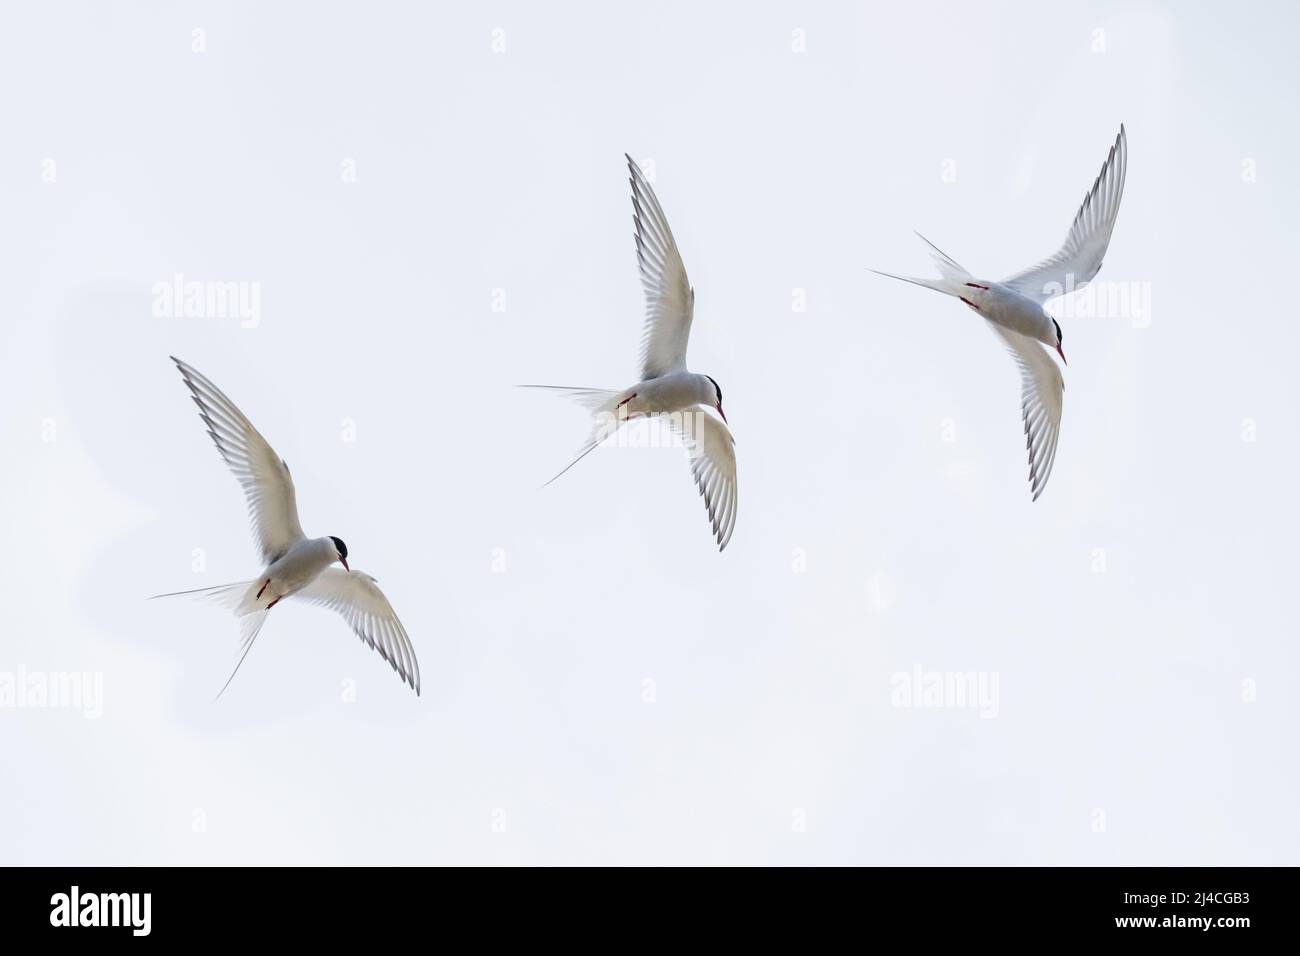 Trio of Artctic Terns flying above Stock Photo